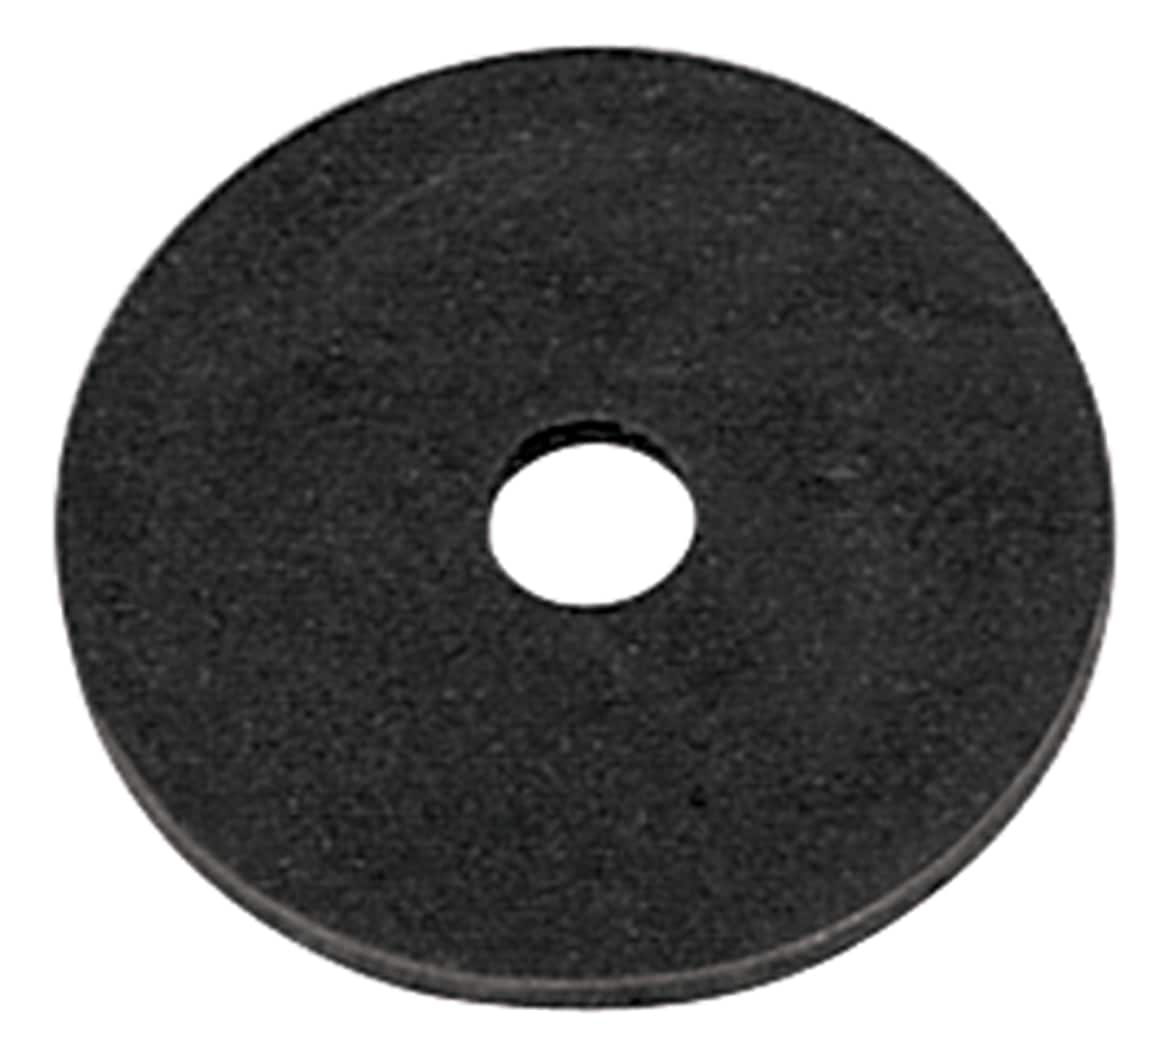 Neoprene Rubber Washer Spacer 7/8" OD x 5/16" ID x 1/4" thick 